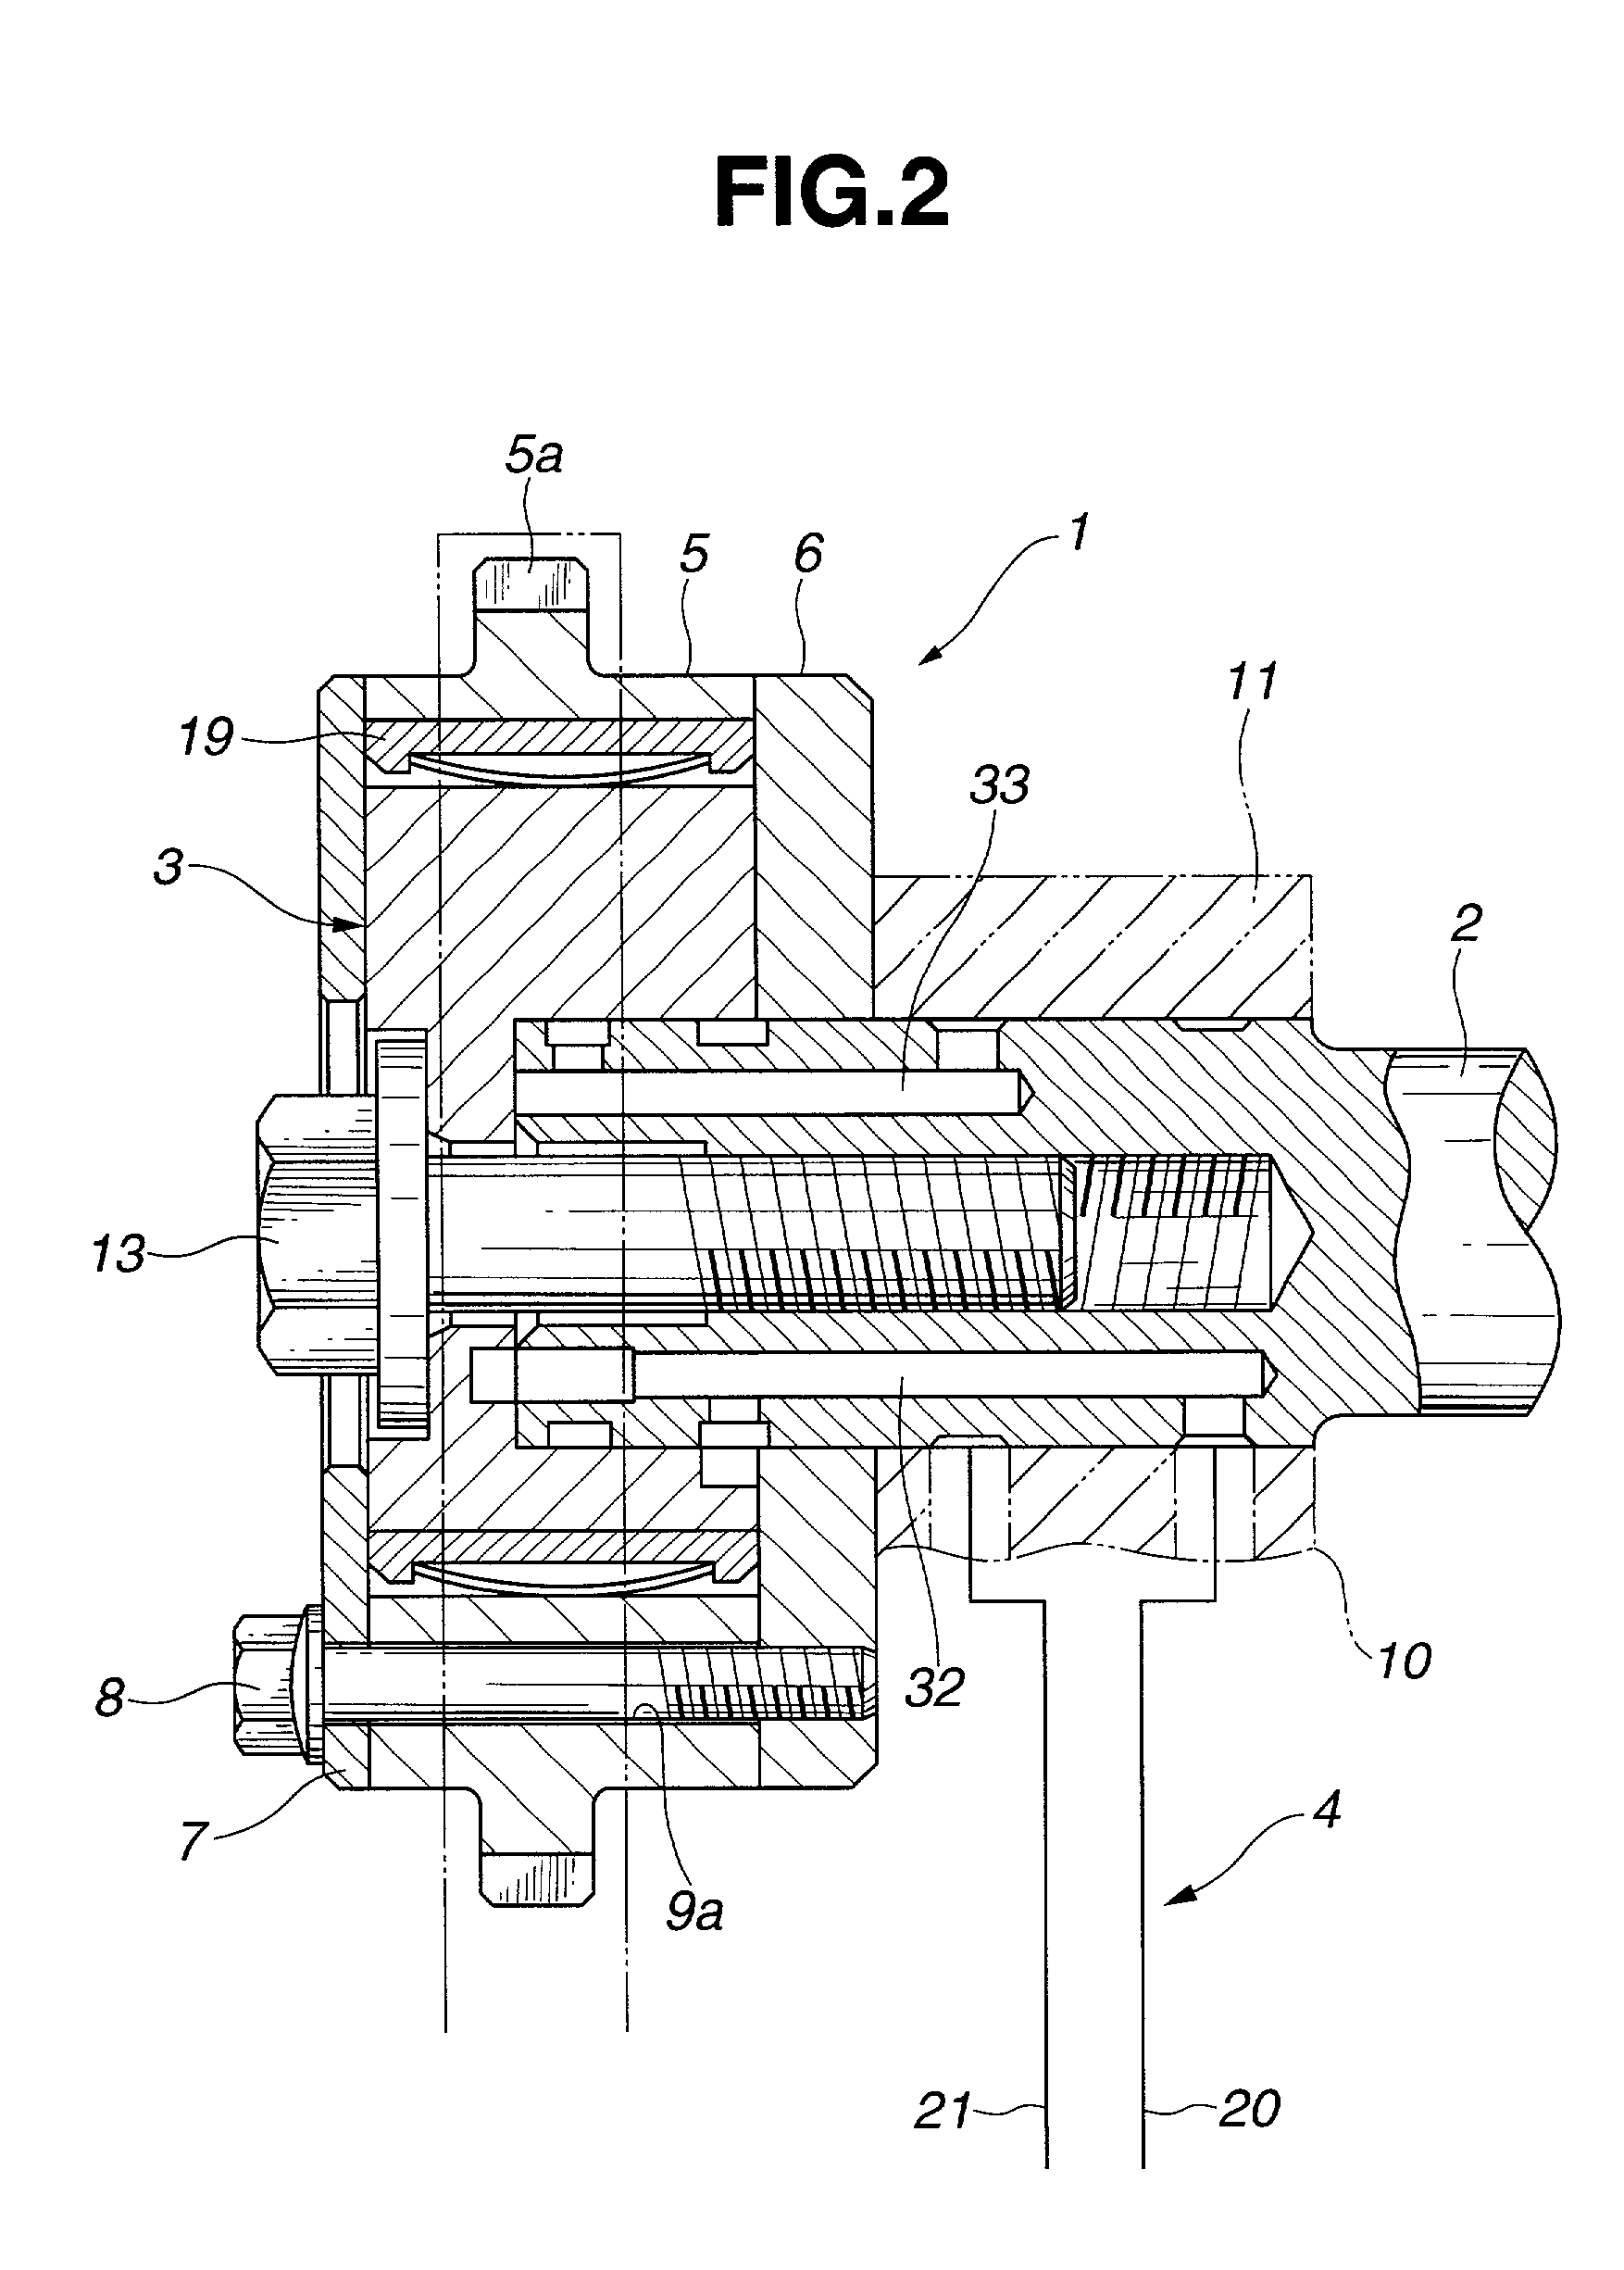 Control apparatus for variably operated engine valve mechanism of internal combustion engine